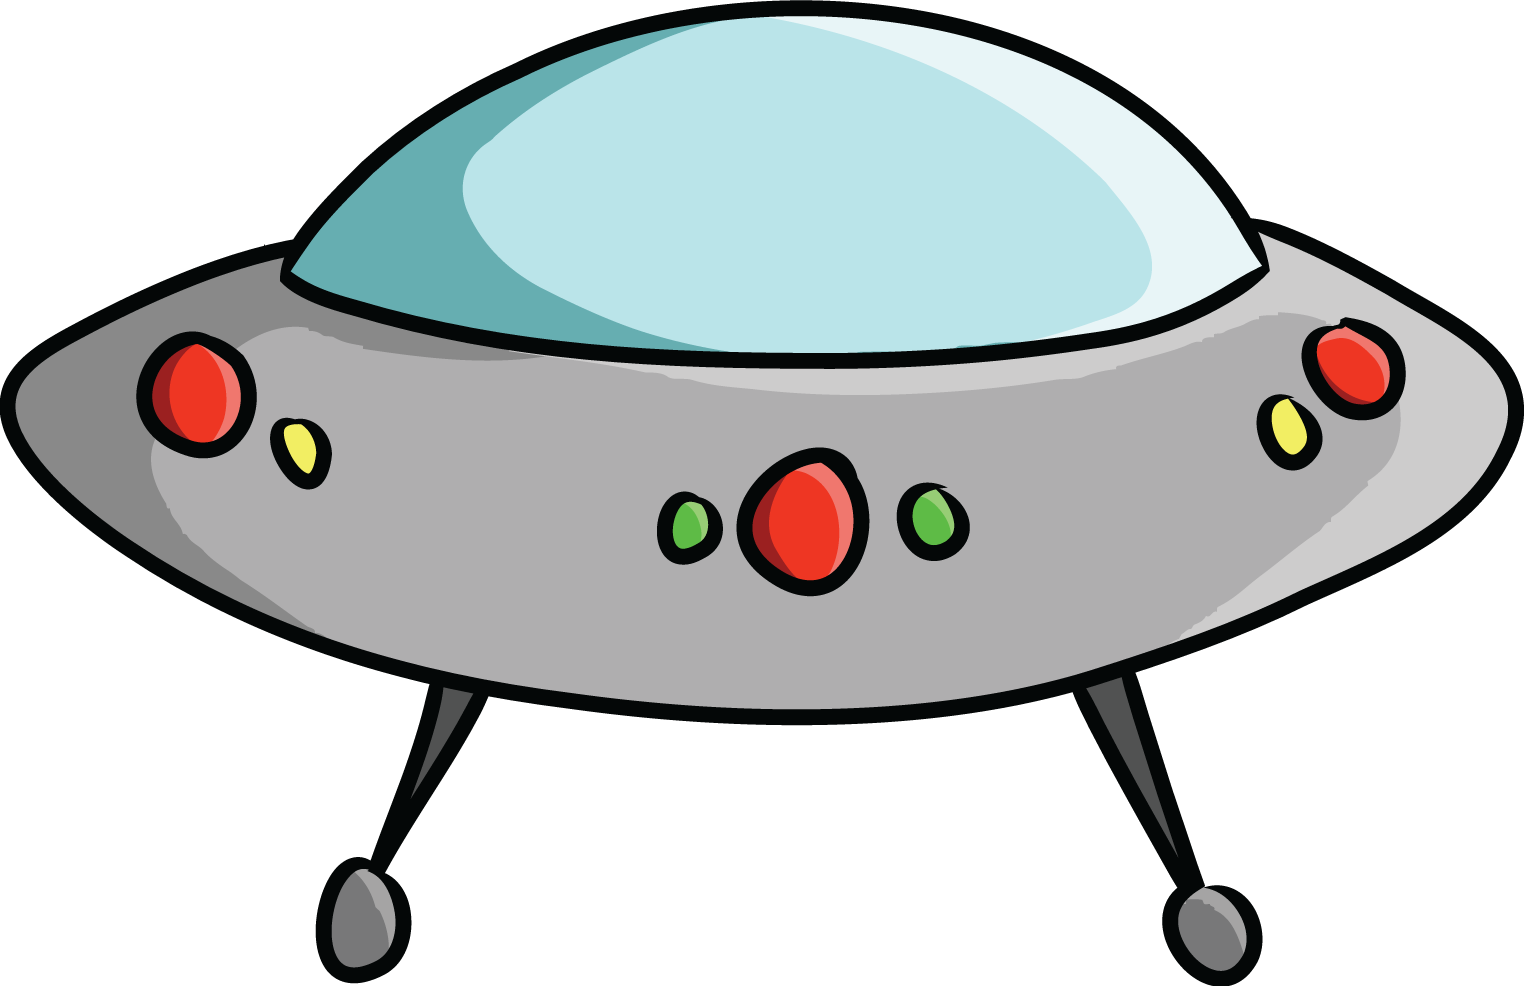 Free To Use Public Domain Flying Saucer Clip Art - Clip Art Of Space Ship (1524x986)